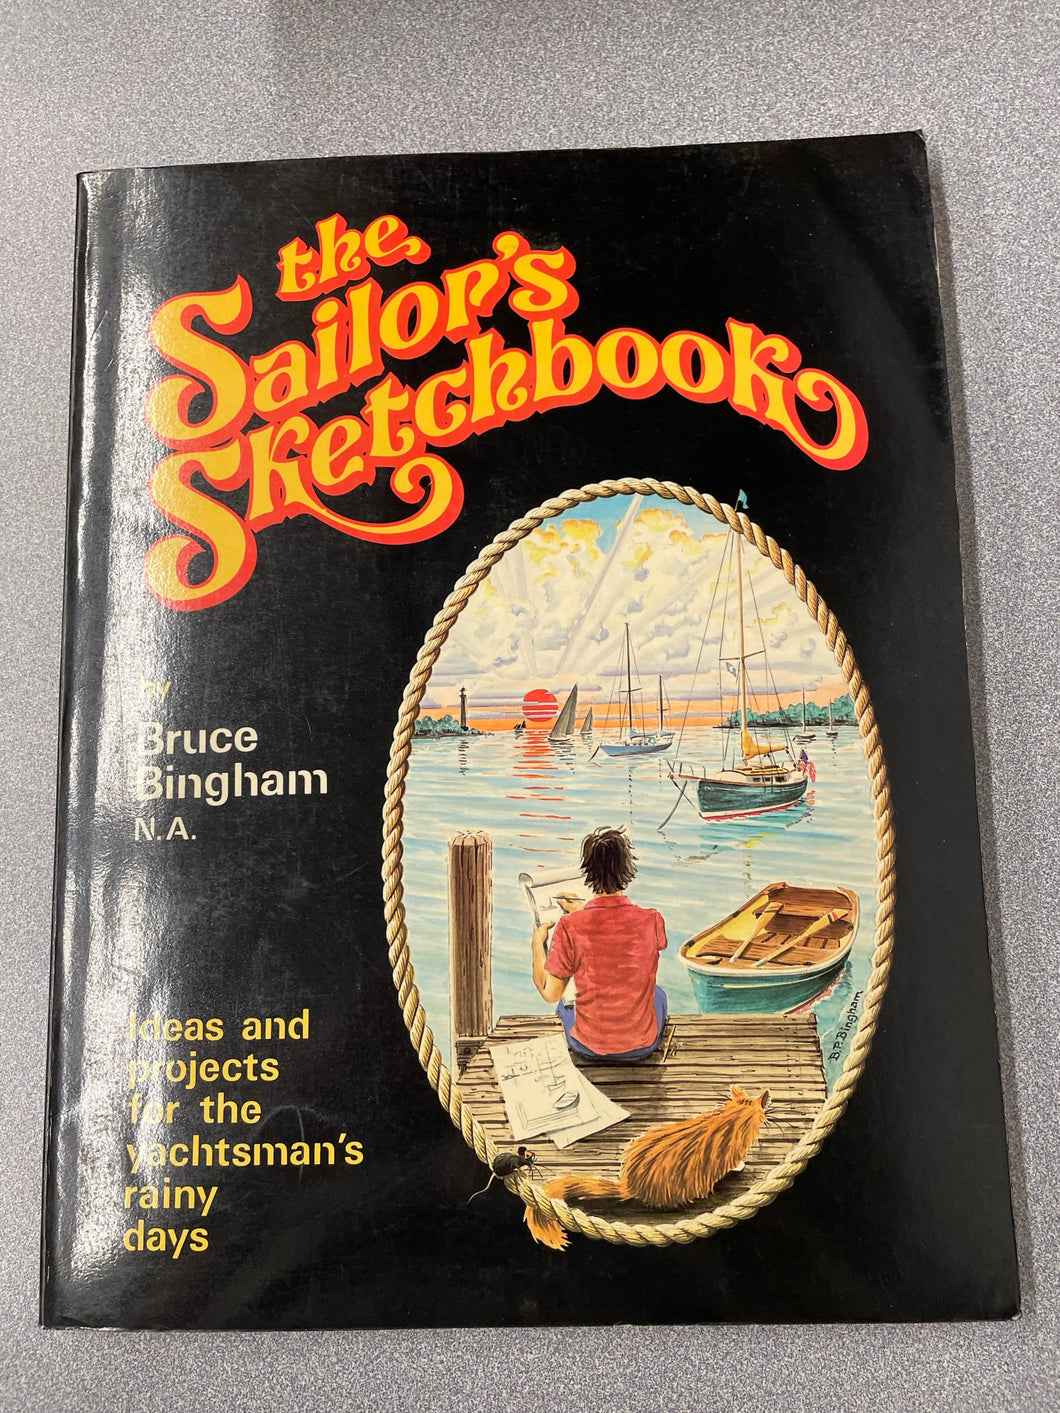 The Sailor's Sketchbook: Ideas and Projects for the Yachtsman's Rainy Days, Bingham, Bruce [1983] VA 4/23